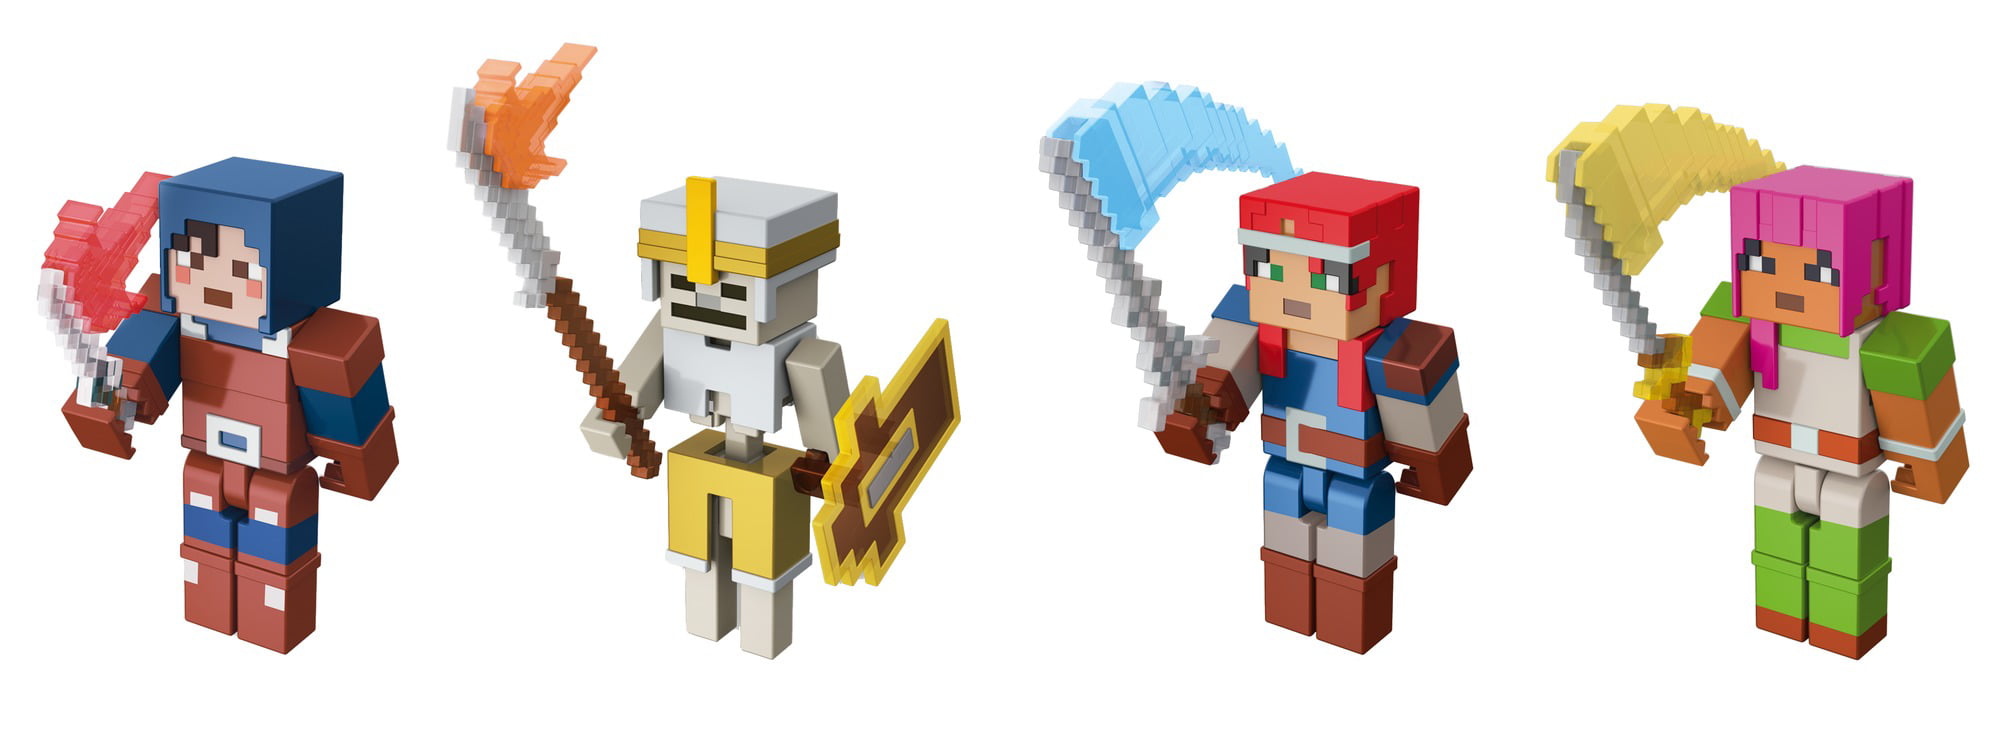 minecraft dungeons characters